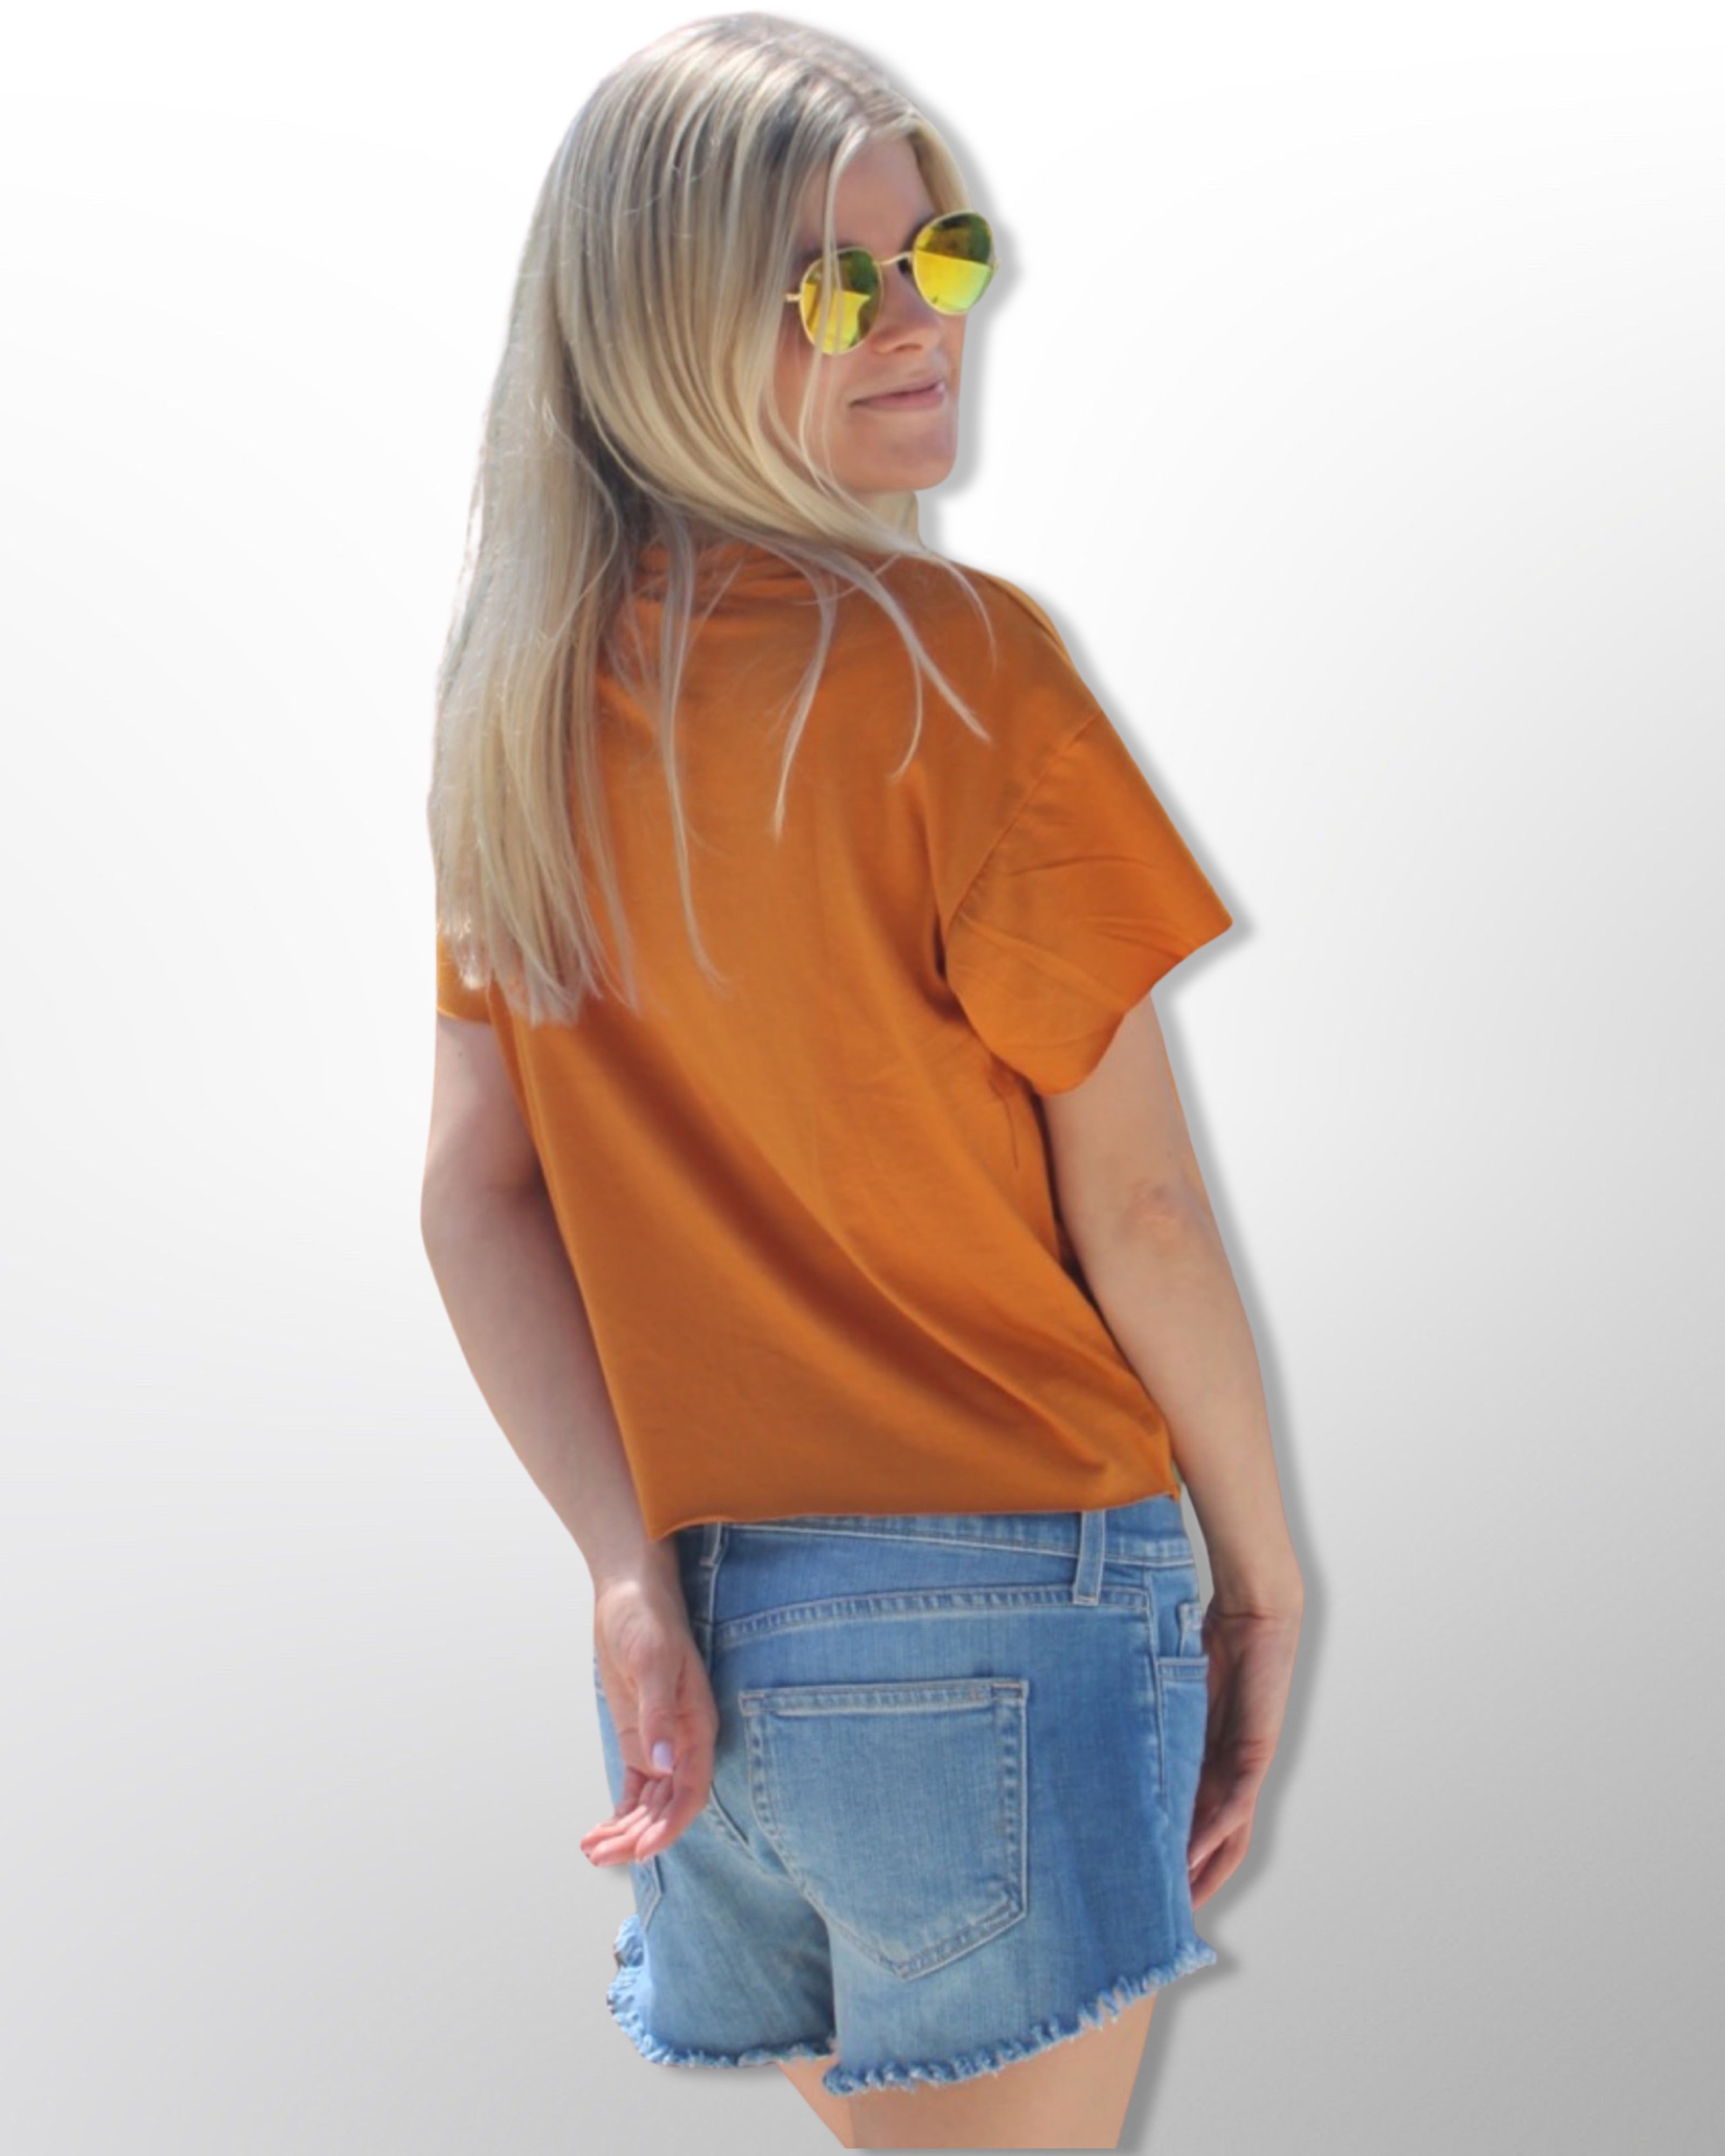 Our Comfy Crop Tees are Super Cute with Boxy Fit Made from Super Soft Cotton , with a Lived in Wash . They are Light and Breezy , Sits right Below The Waist and are Oh So Comfy . Say Hello to Your New Basic Tee with The Perfect Fit ! 100% Cotton Machine Wash Designed in California Made in USA